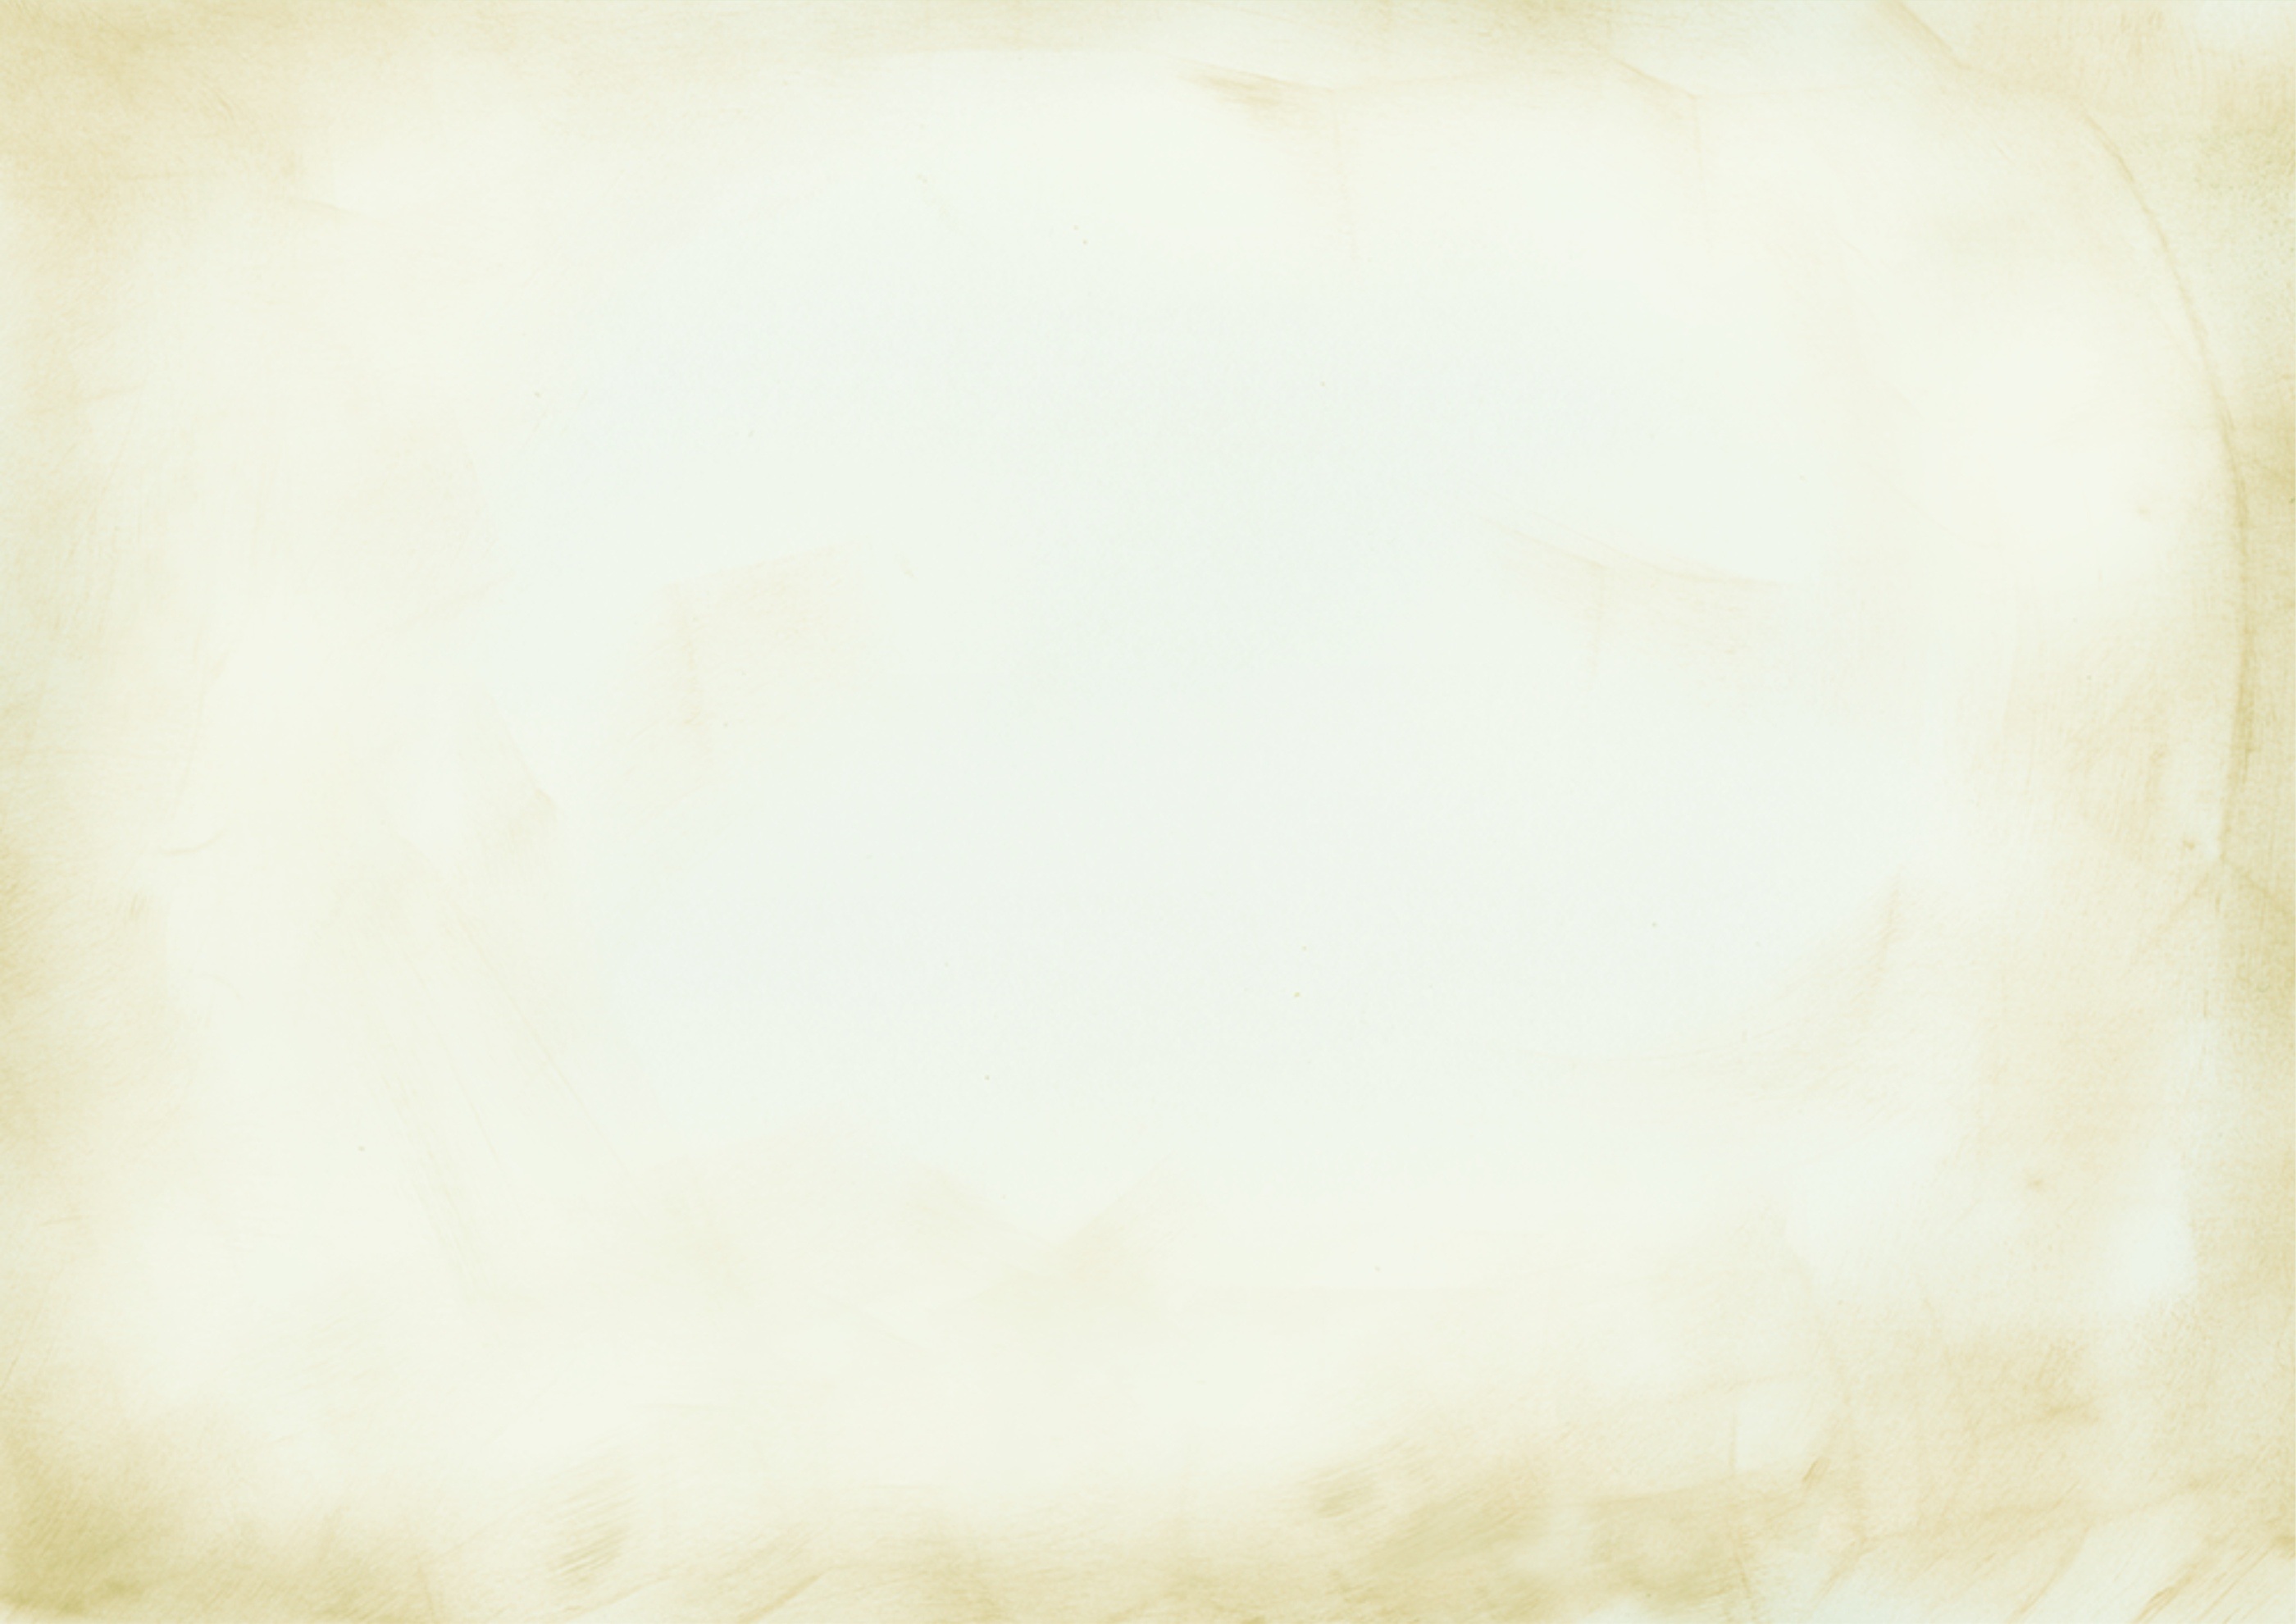 free-download-parchment-as-background-free-image-download-2800x1980